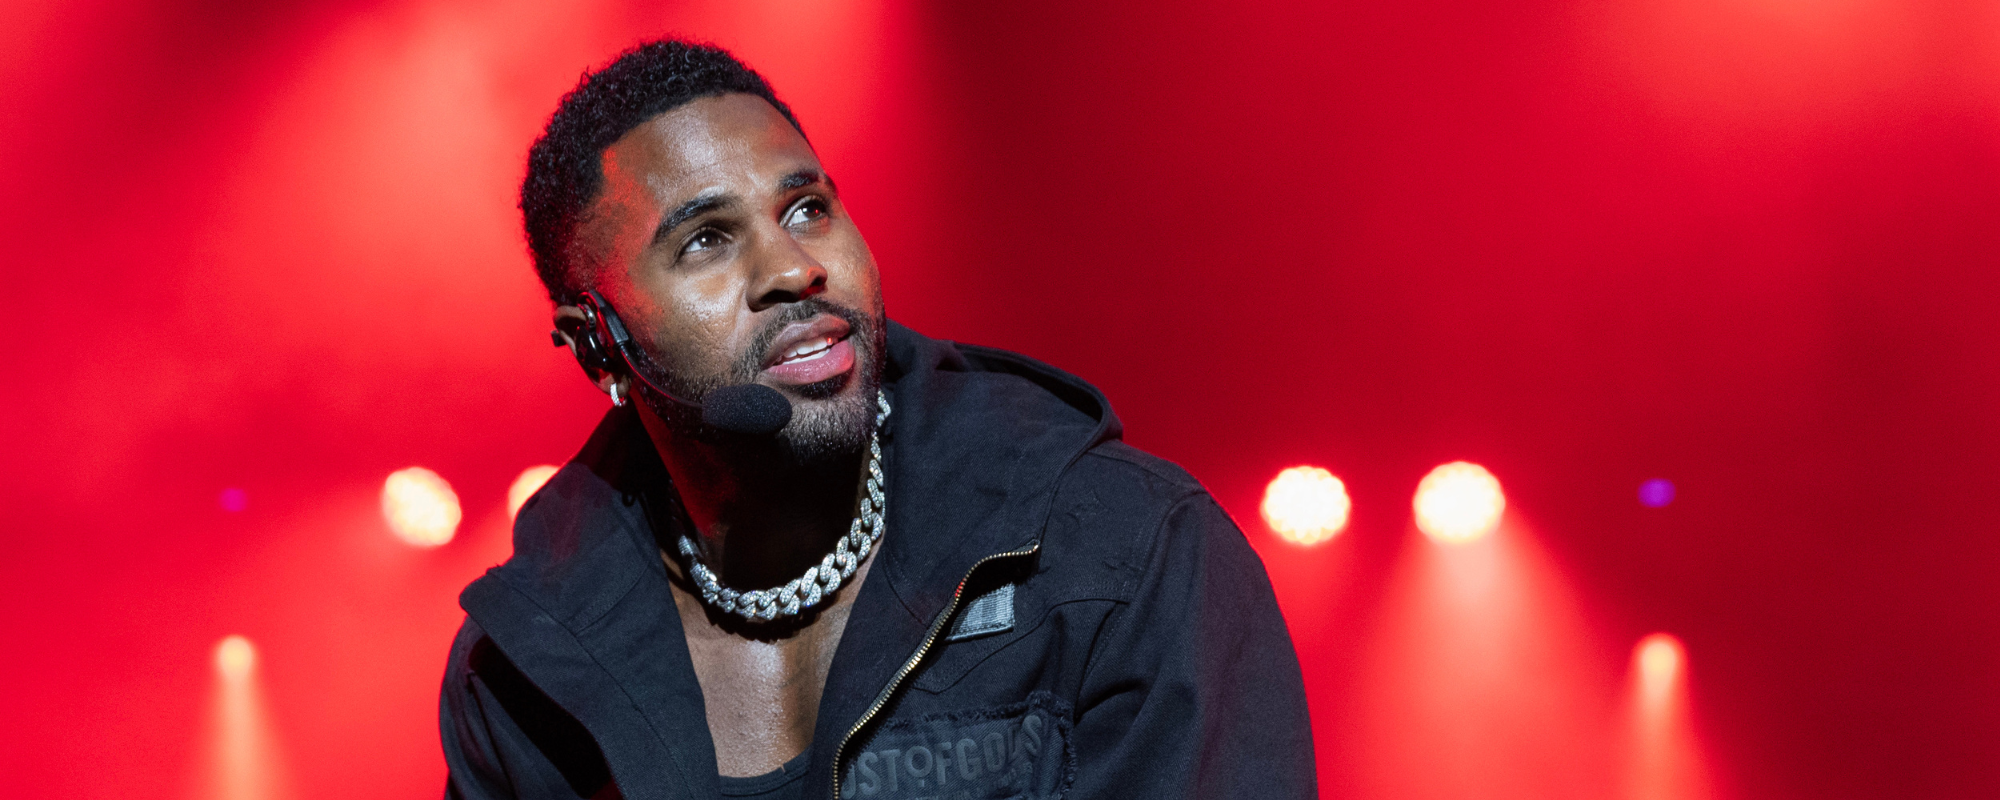 Jason Derulo Responds to Sexual Harassment Lawsuit: “These Claims Are Completely False and Hurtful”